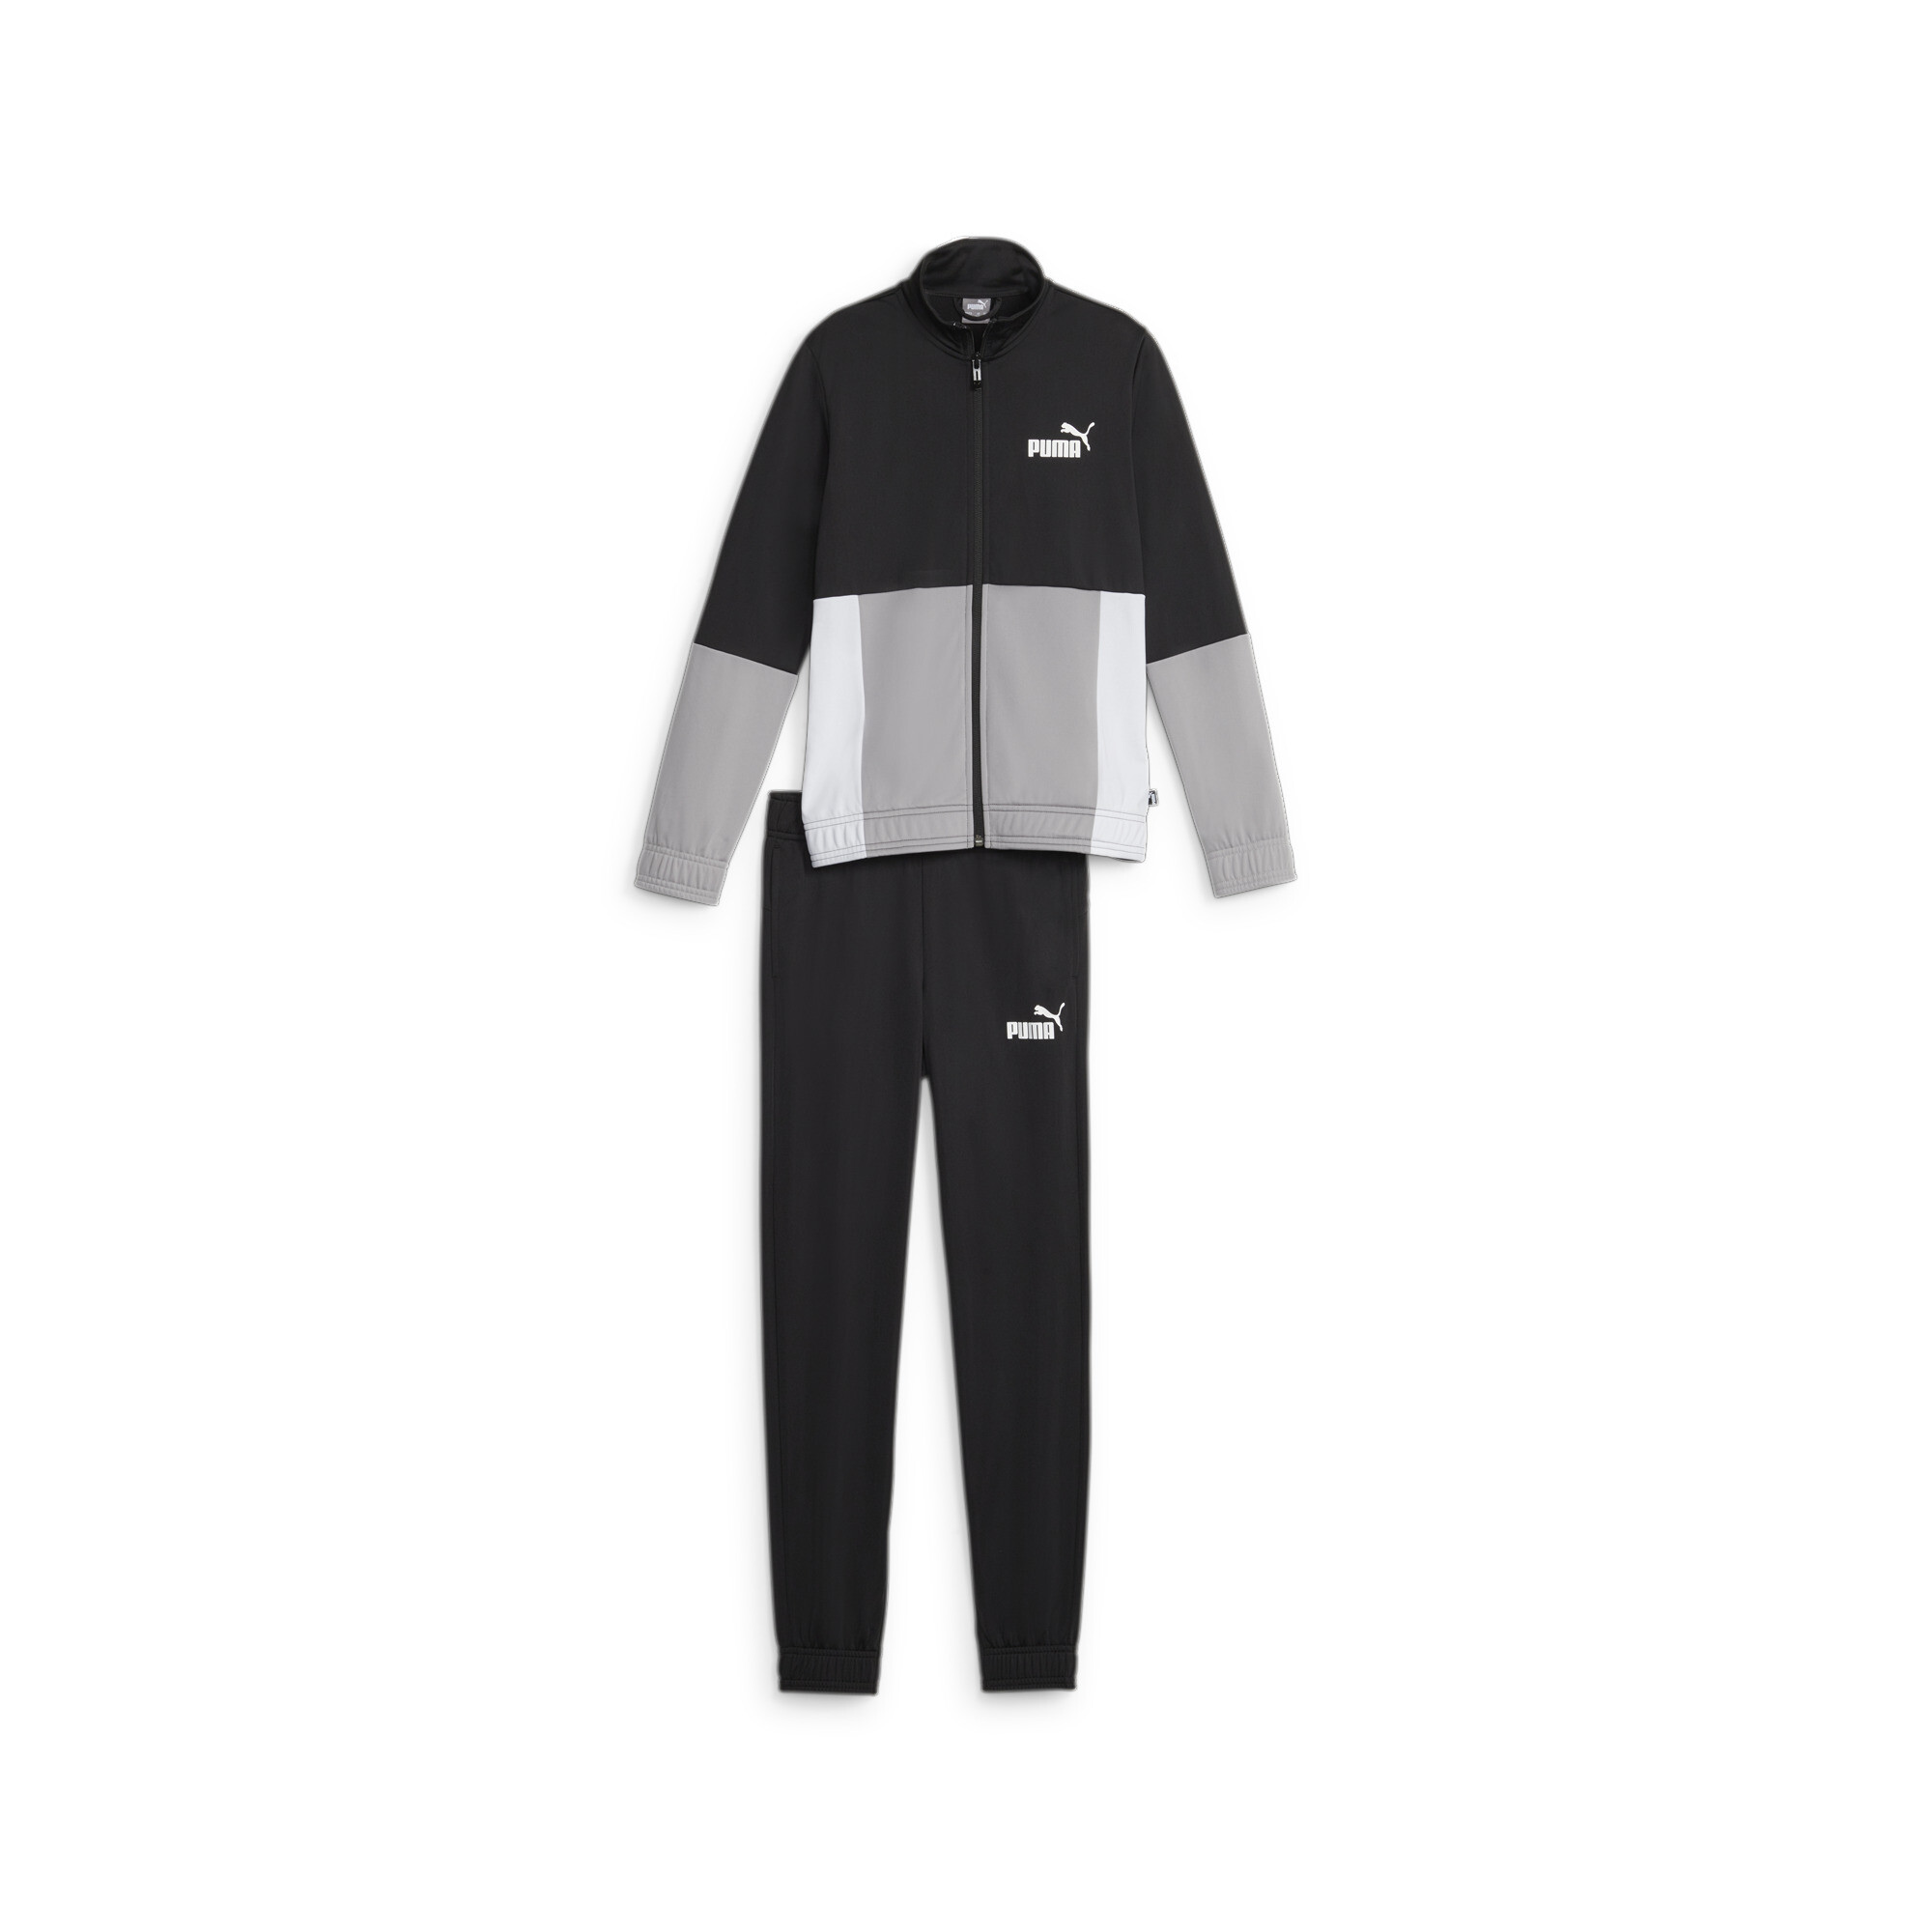 Men's Puma Colorblock Youth Poly Suit, Black, Size 7-8Y, Clothing